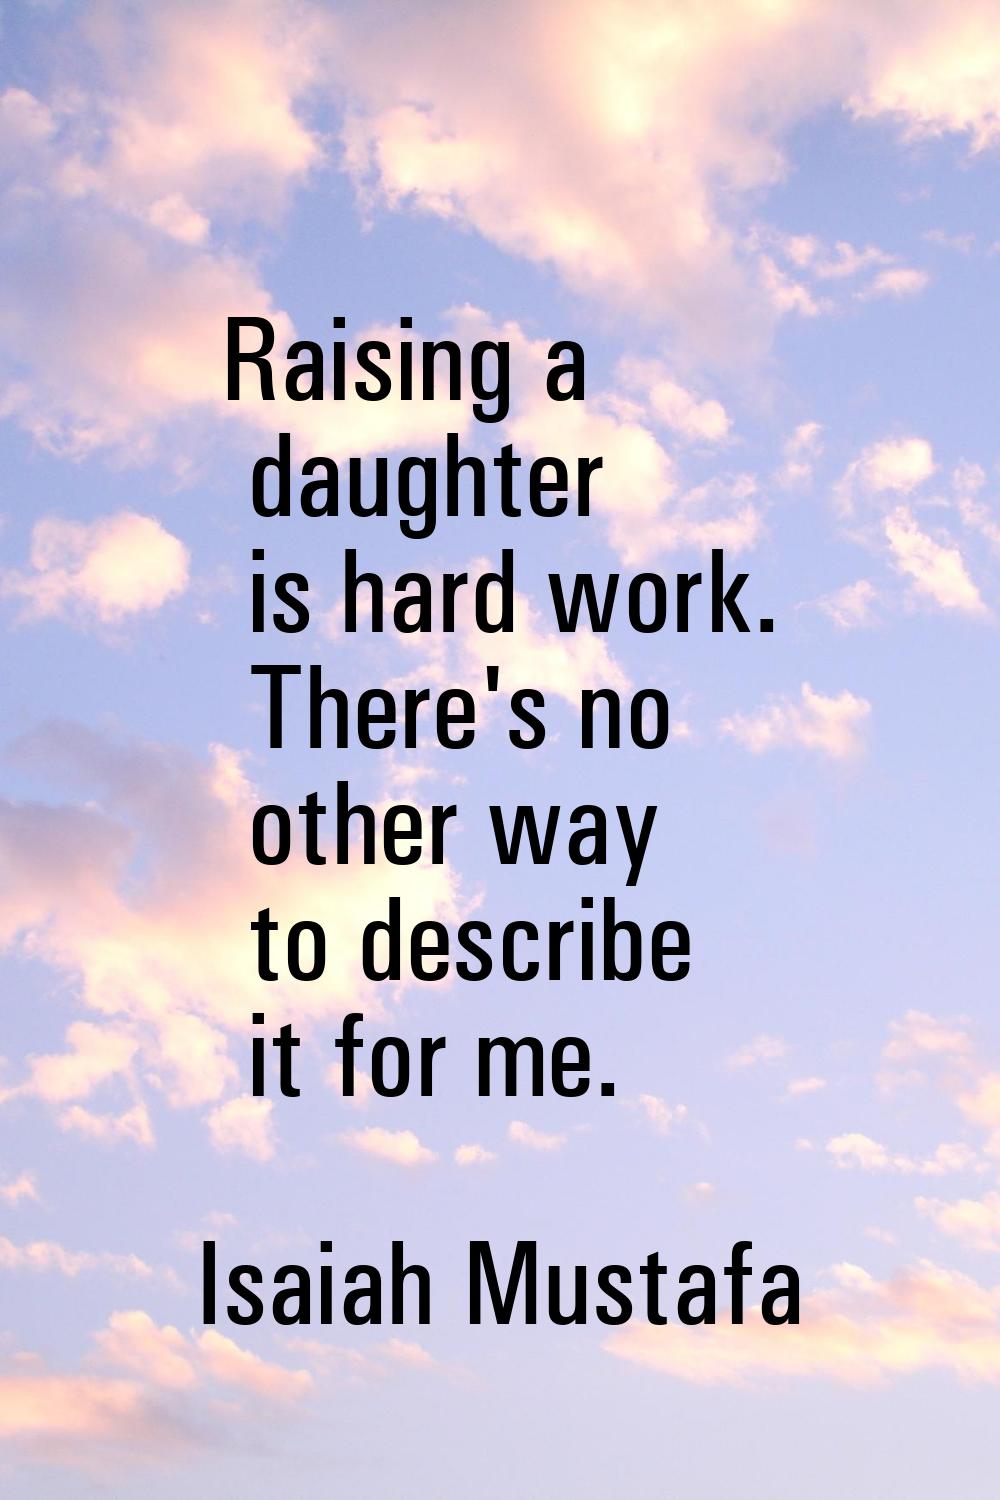 Raising a daughter is hard work. There's no other way to describe it for me.